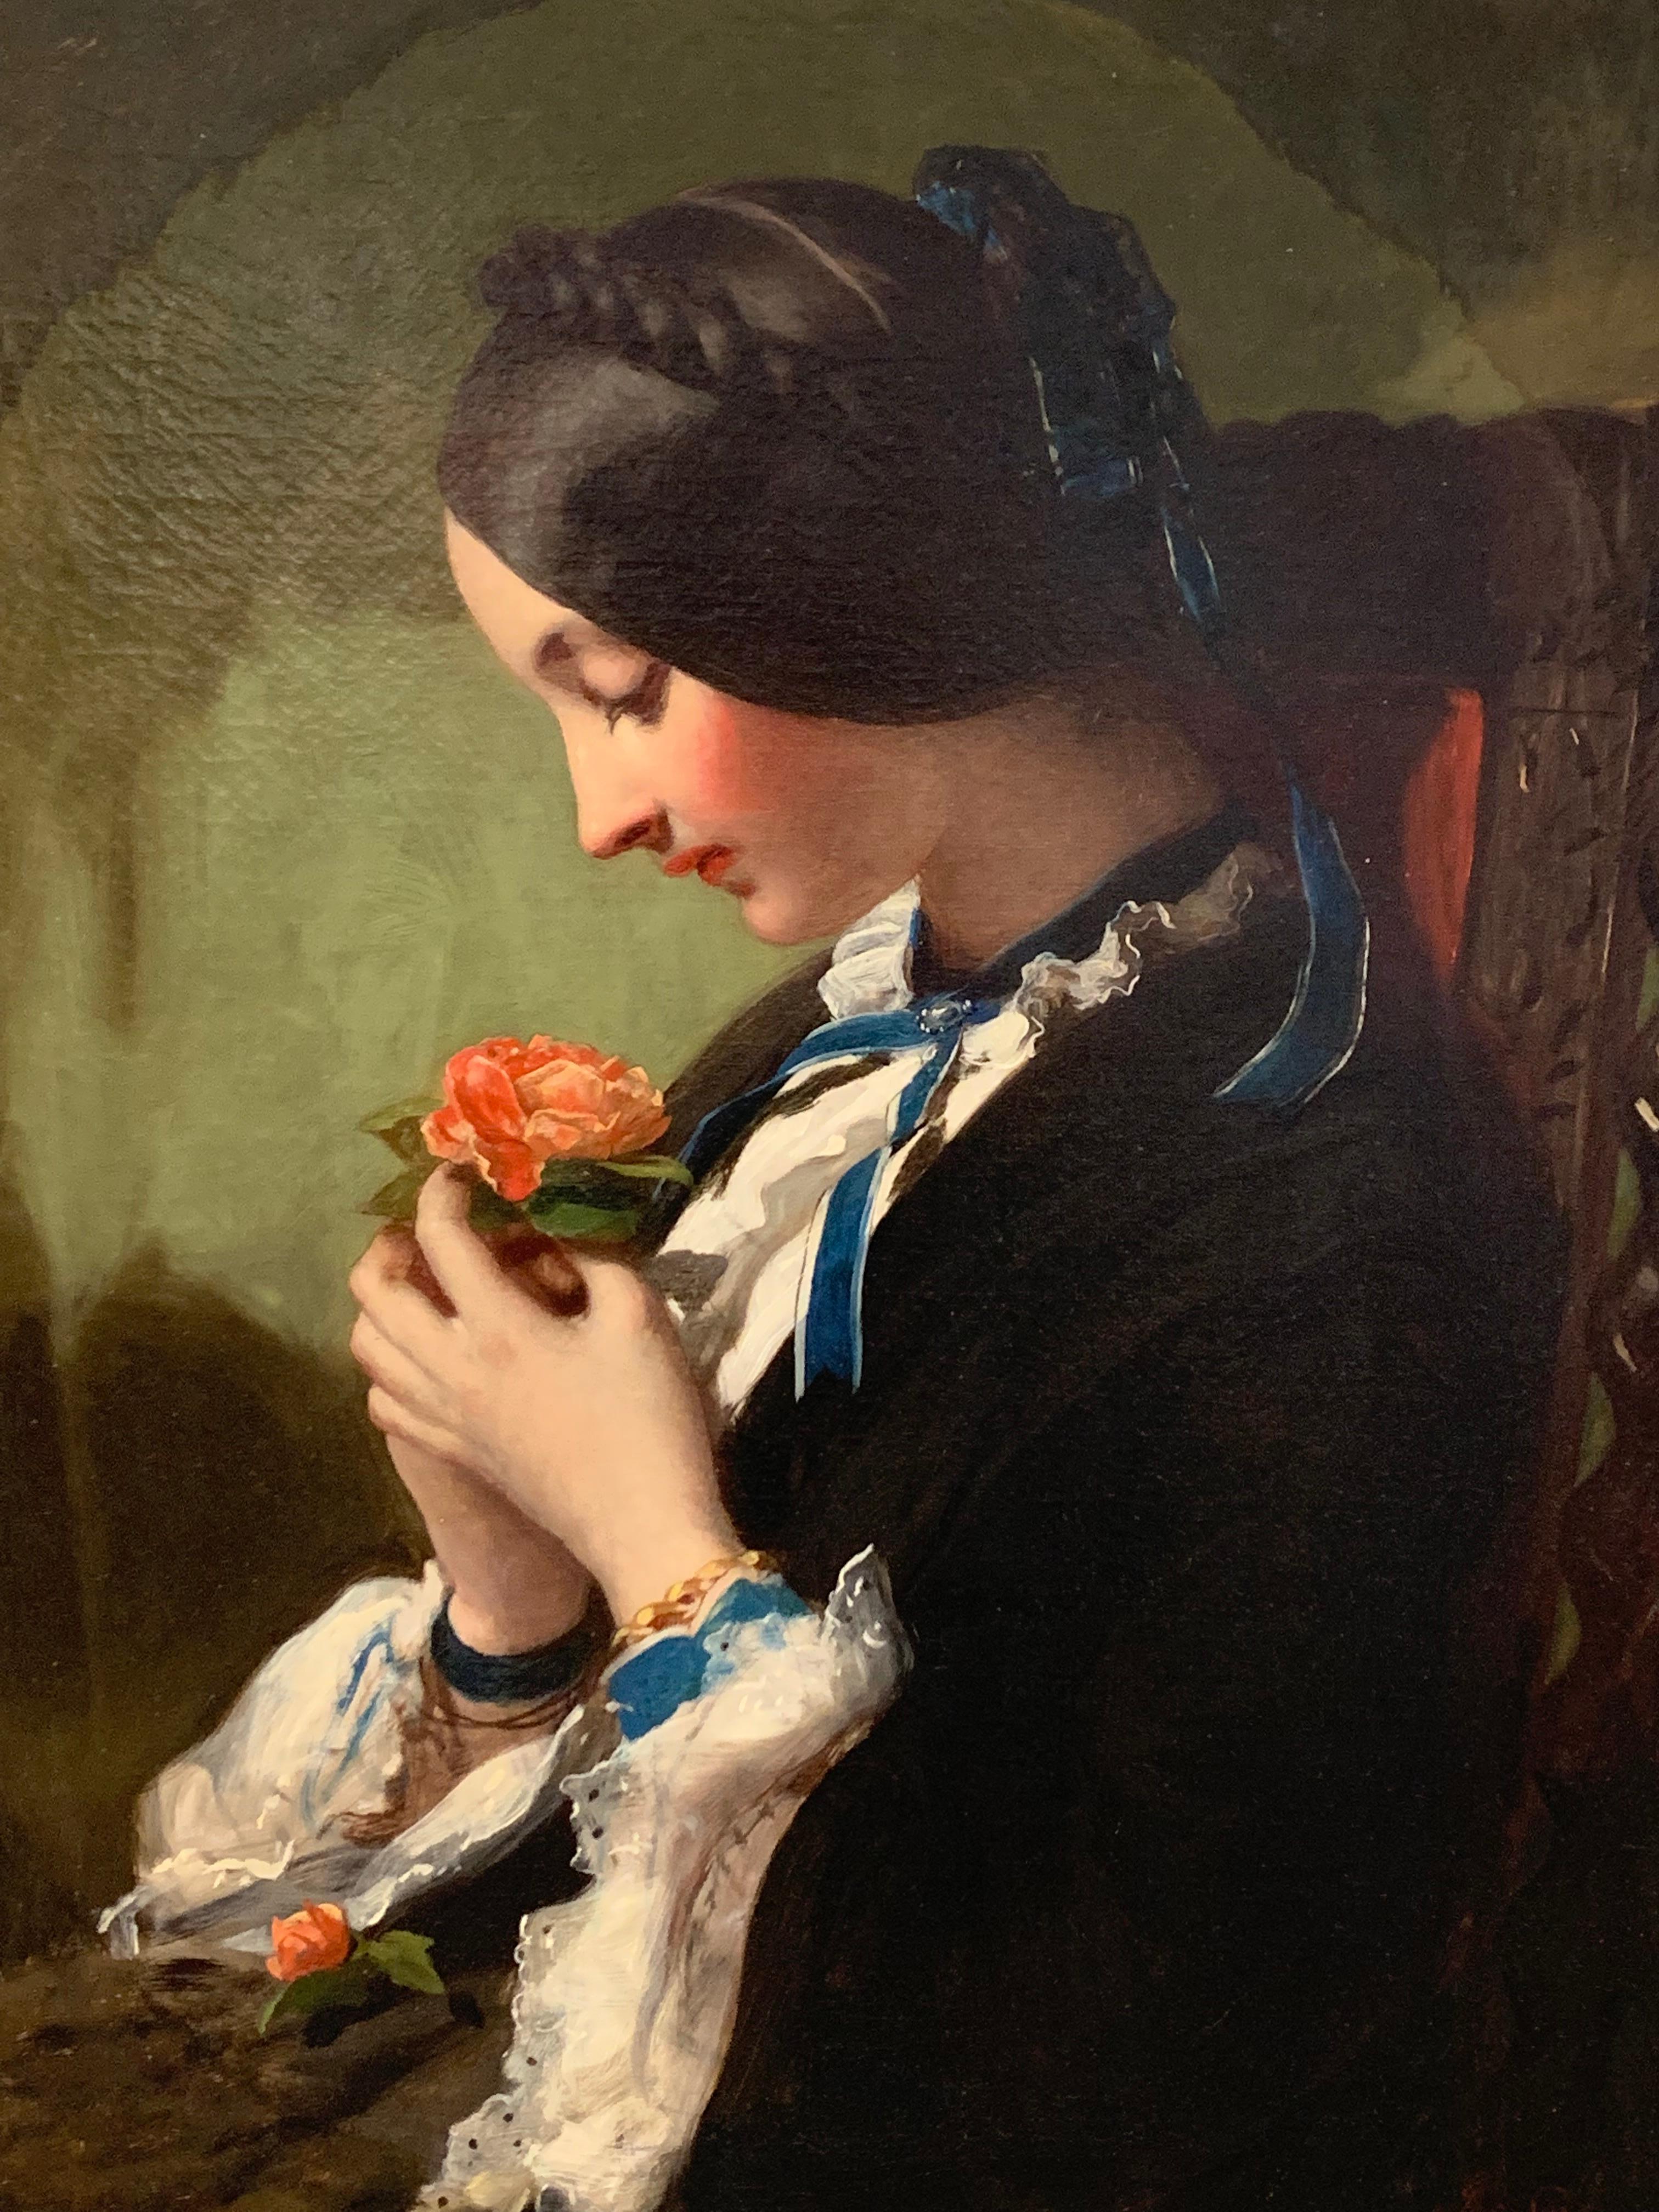 James Sant was a well-known Victorian painter particularly of women and children, as both portraits are allegorical subjects, i.e. a painting that can be interpreted to have a hidden meaning, often political or moral.
Sant exhibited at the Royal